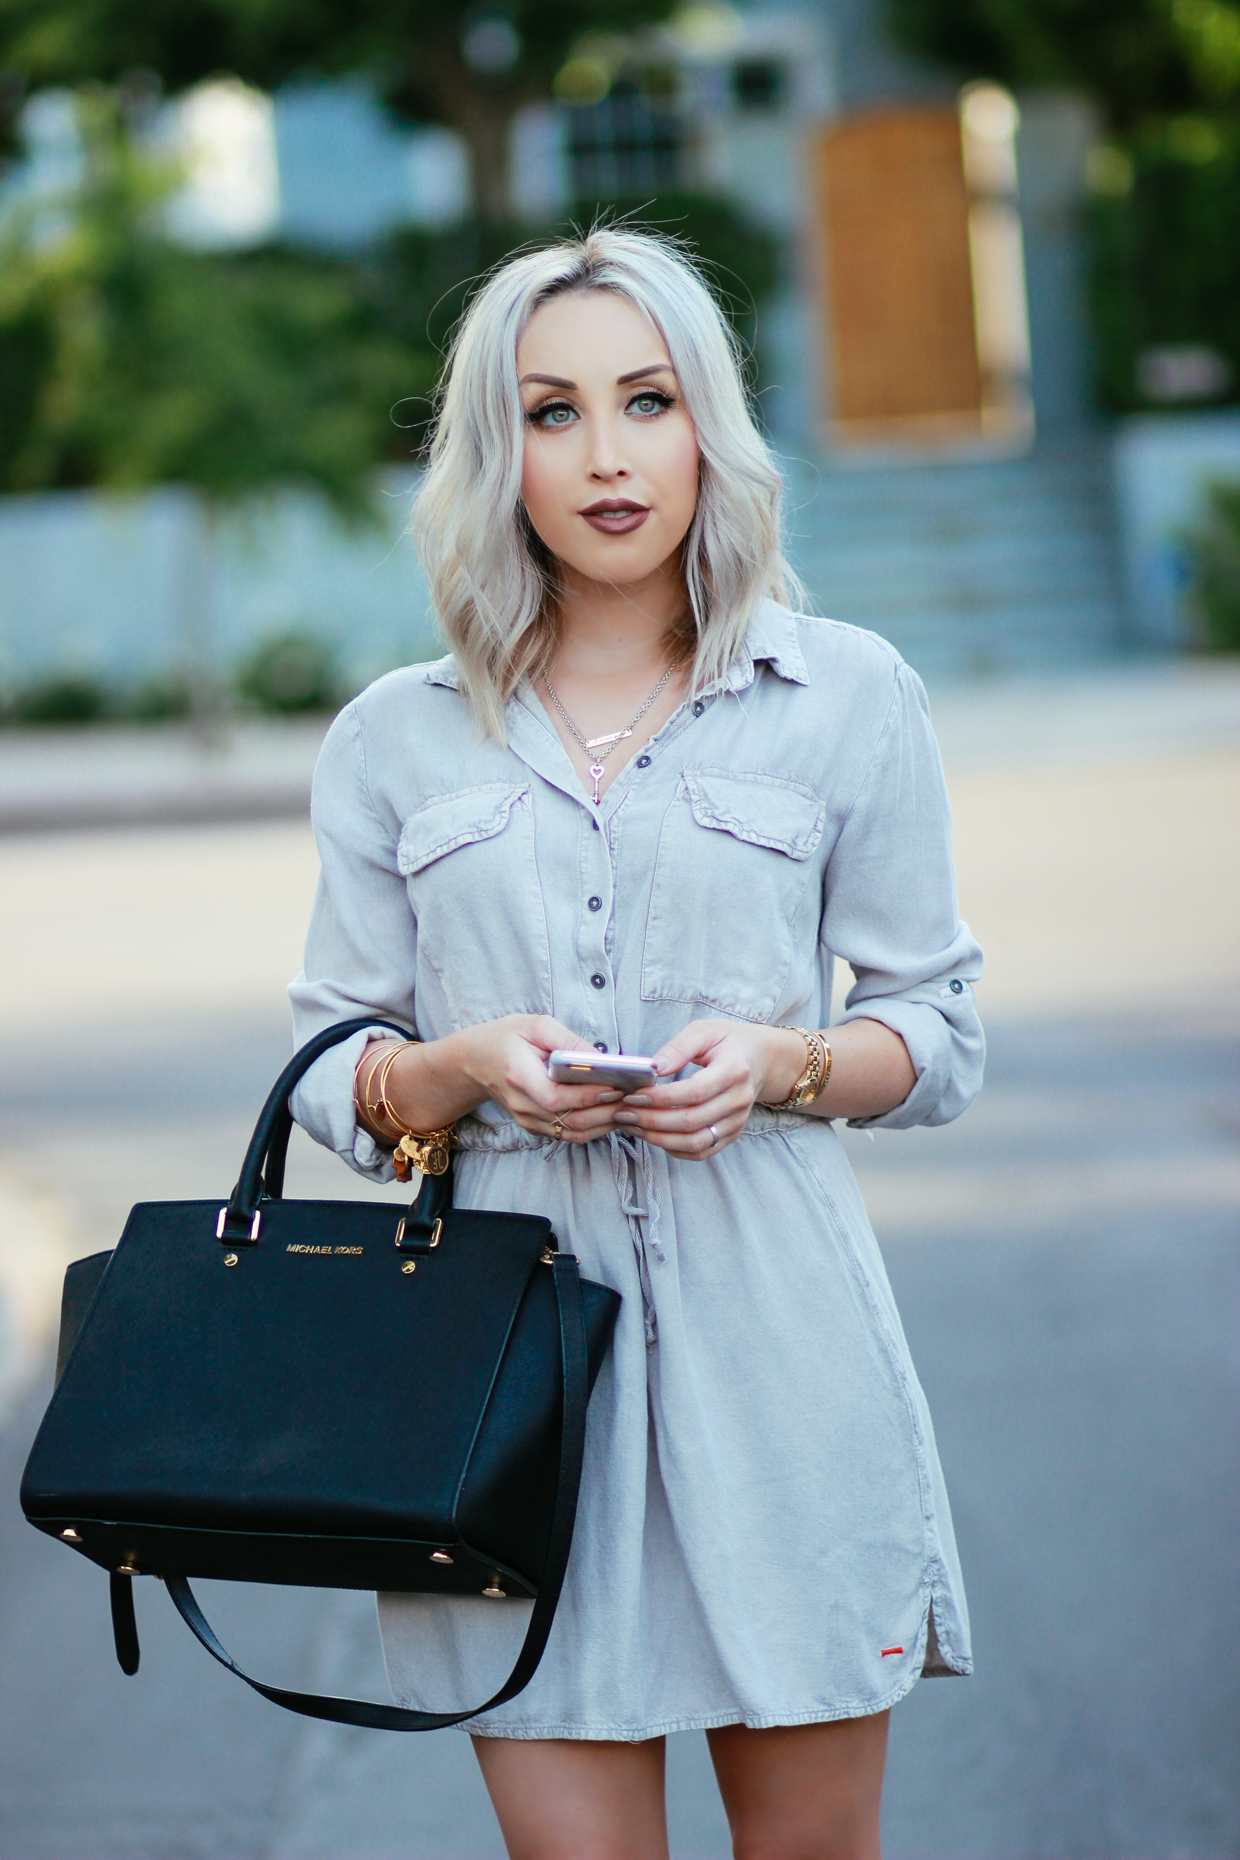 Blondie in the City | Button Up Cargo Dress, Michael Kors Bag, Ankle Strap Heels